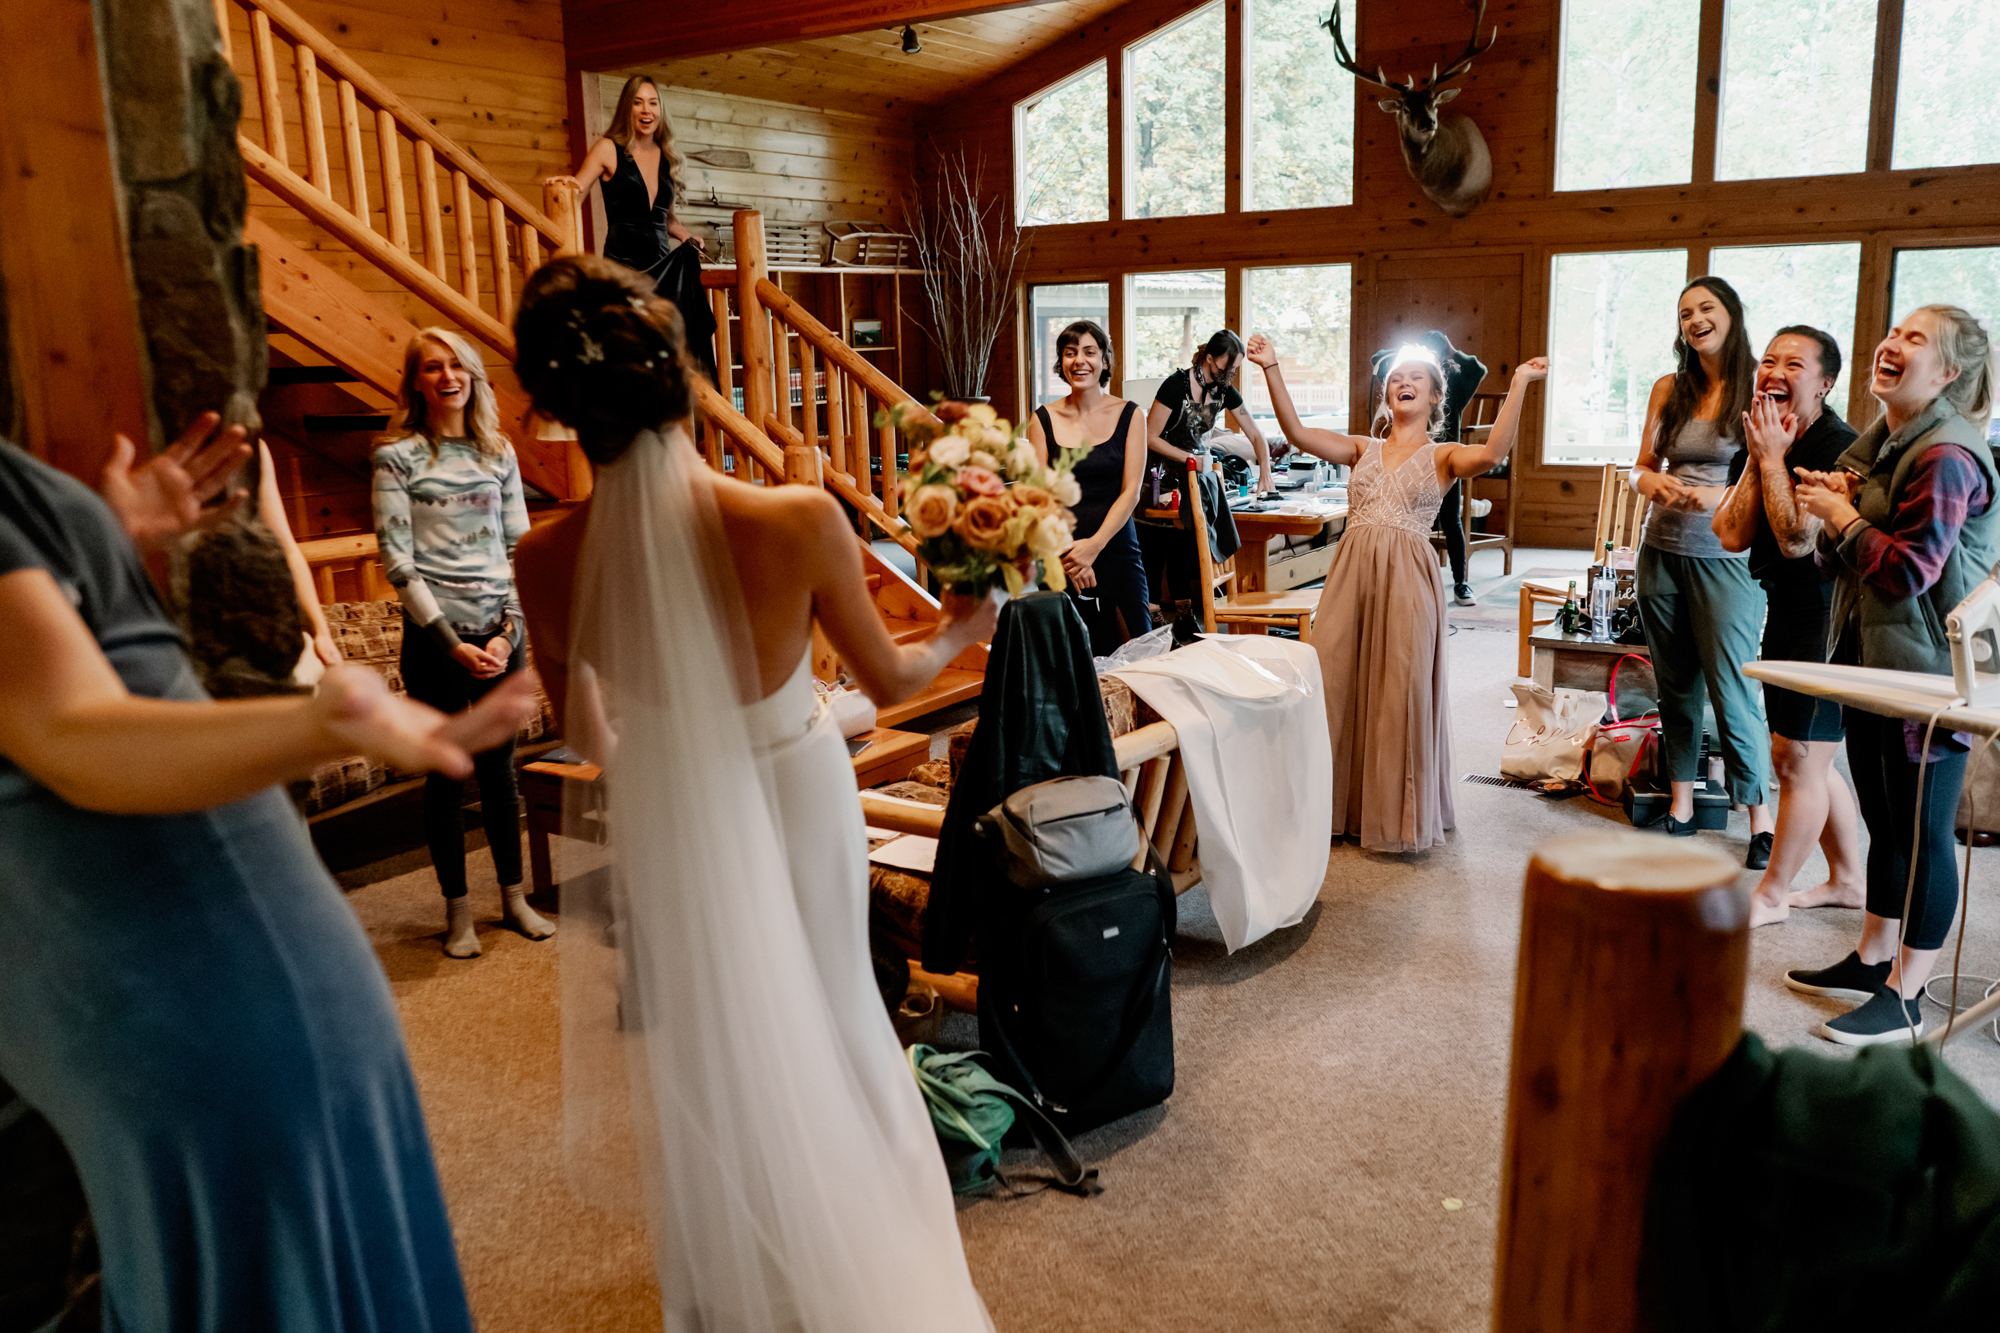 Mountain Springs Lodge weddings: Veronica's bridesmaids react to seeing her in her gown